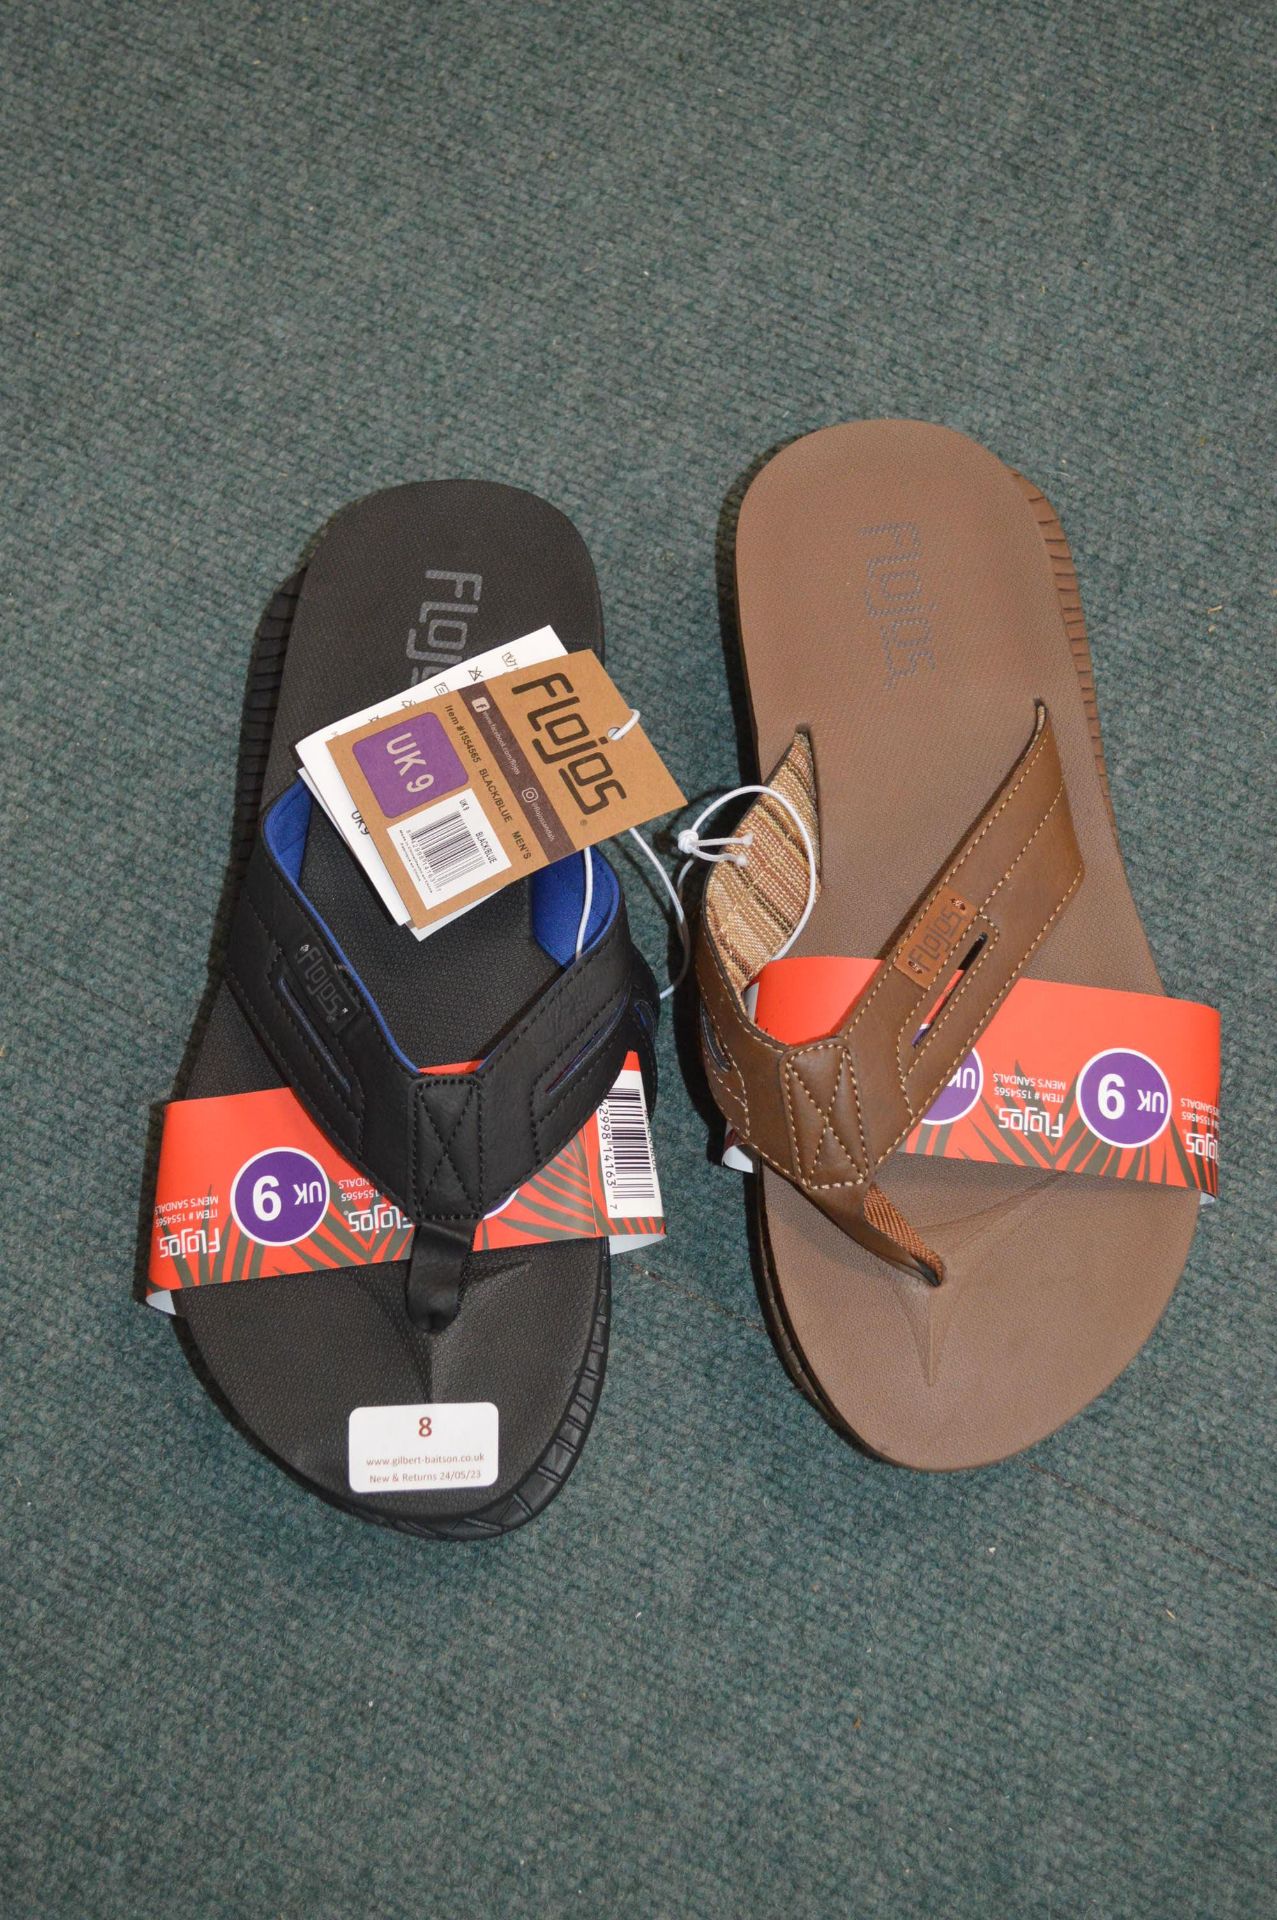 *Two Pairs of Flojos Gents Flip-Flops Size: (